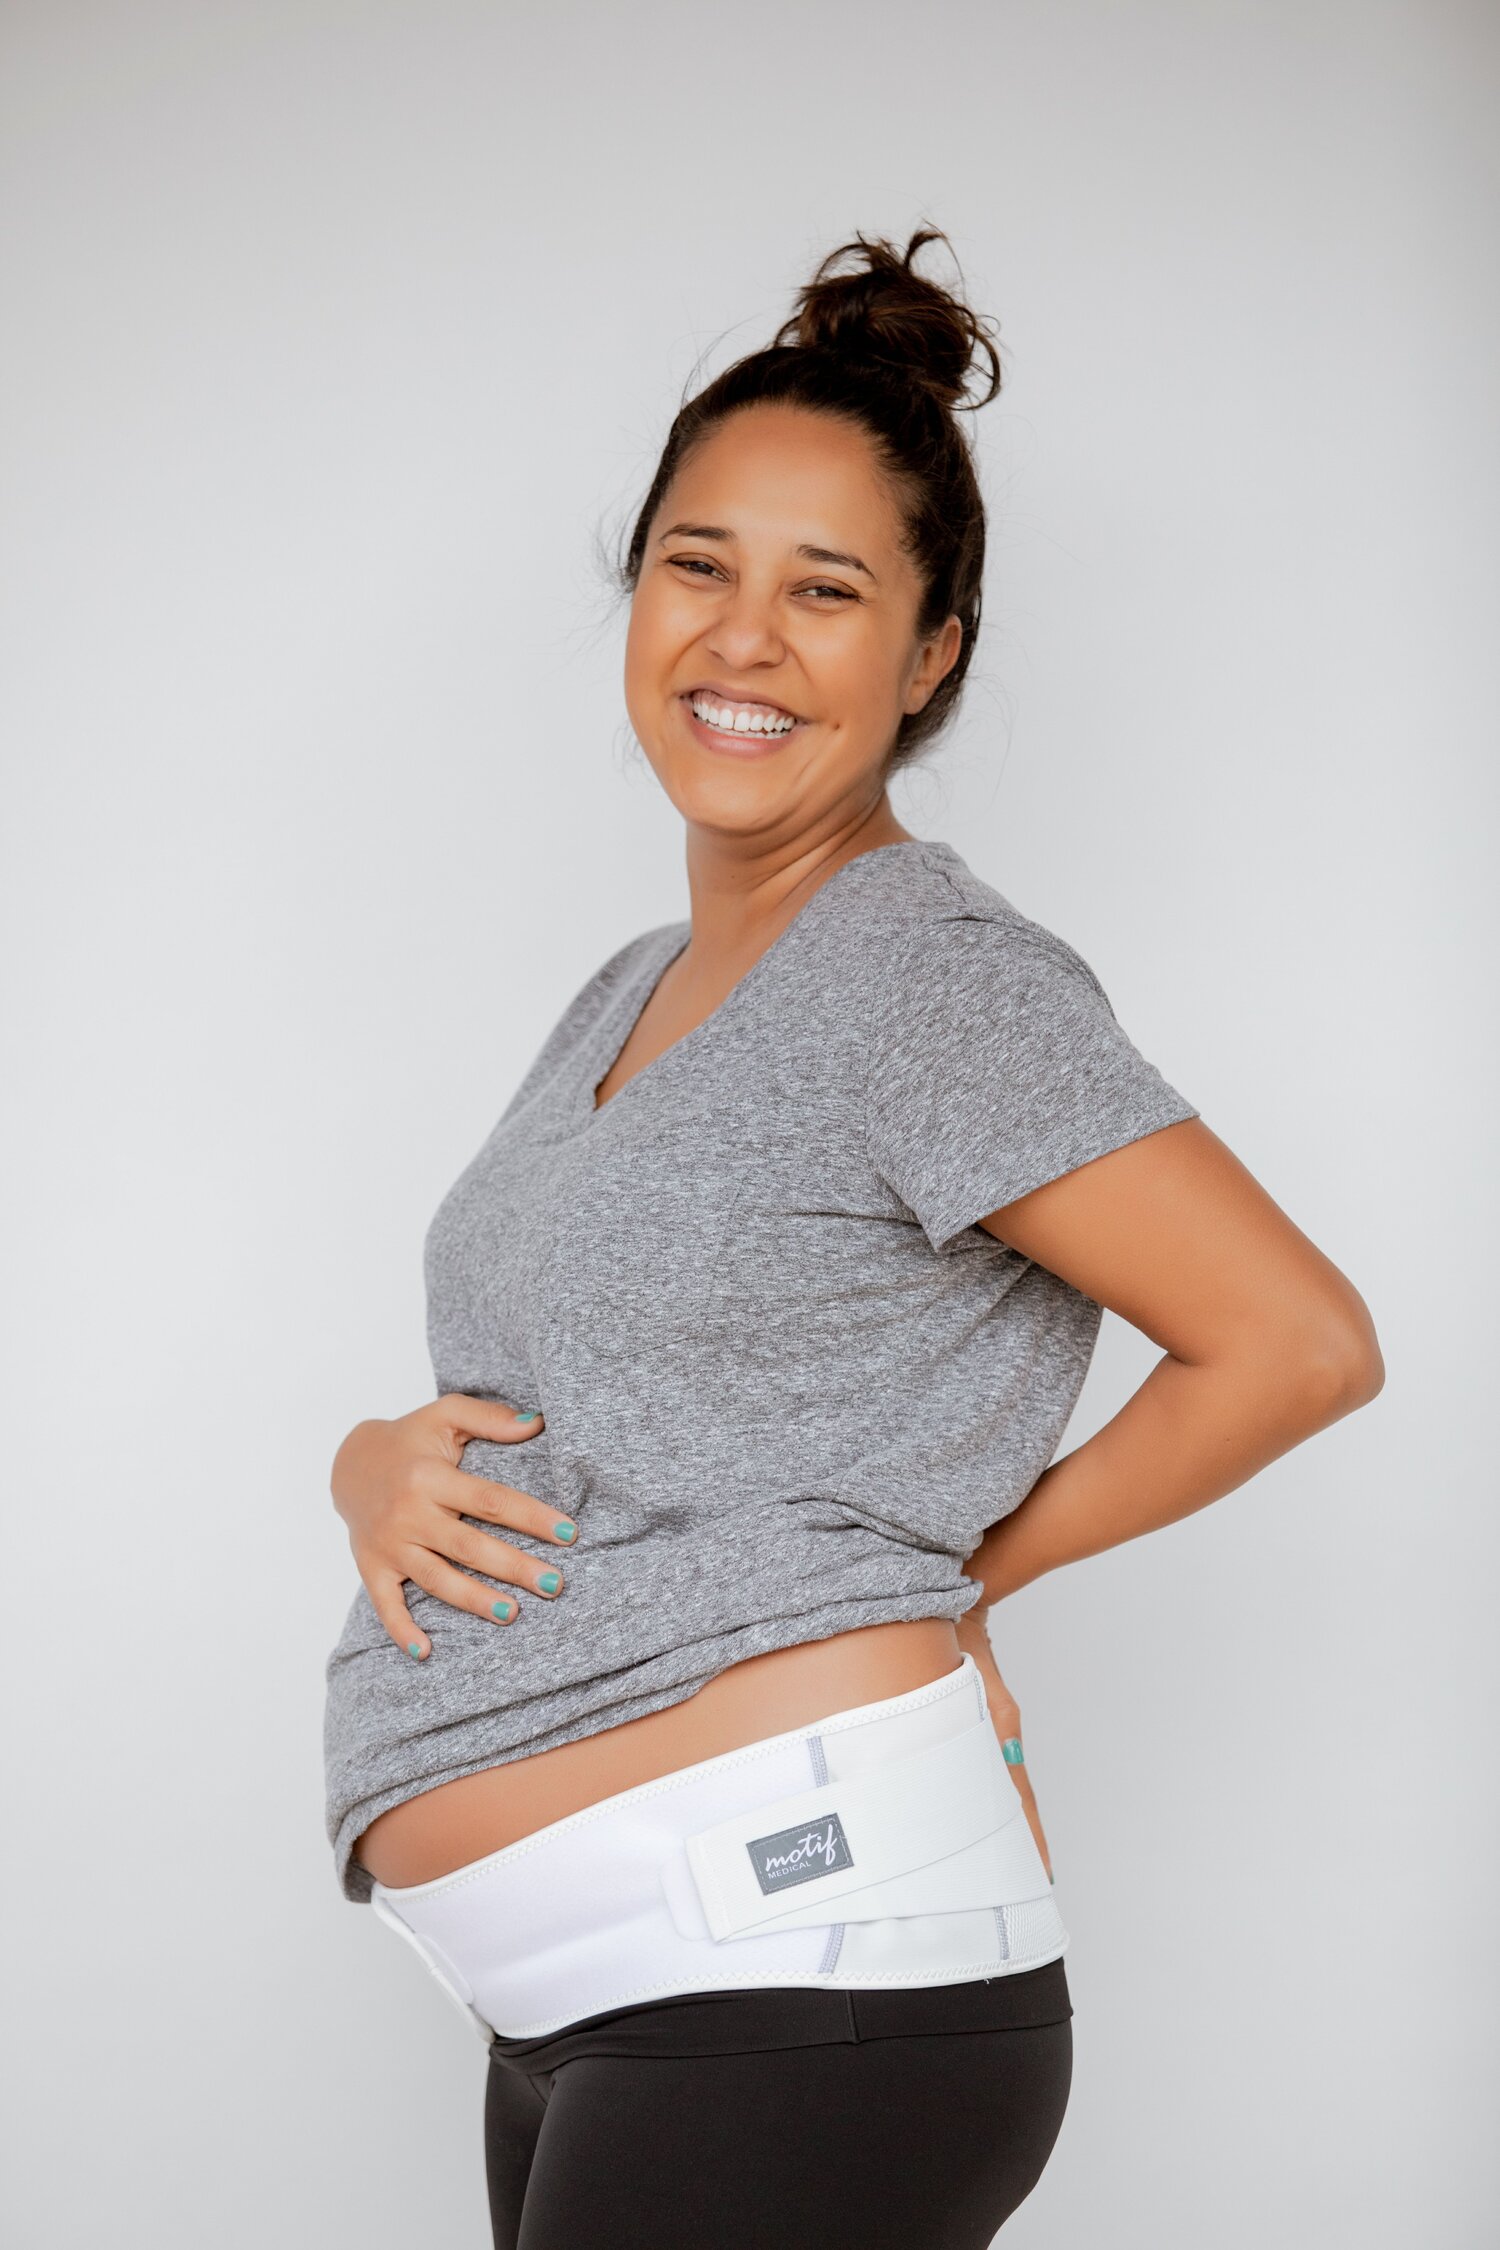 Motif Medical pregnancy support band review: Our honest thoughts